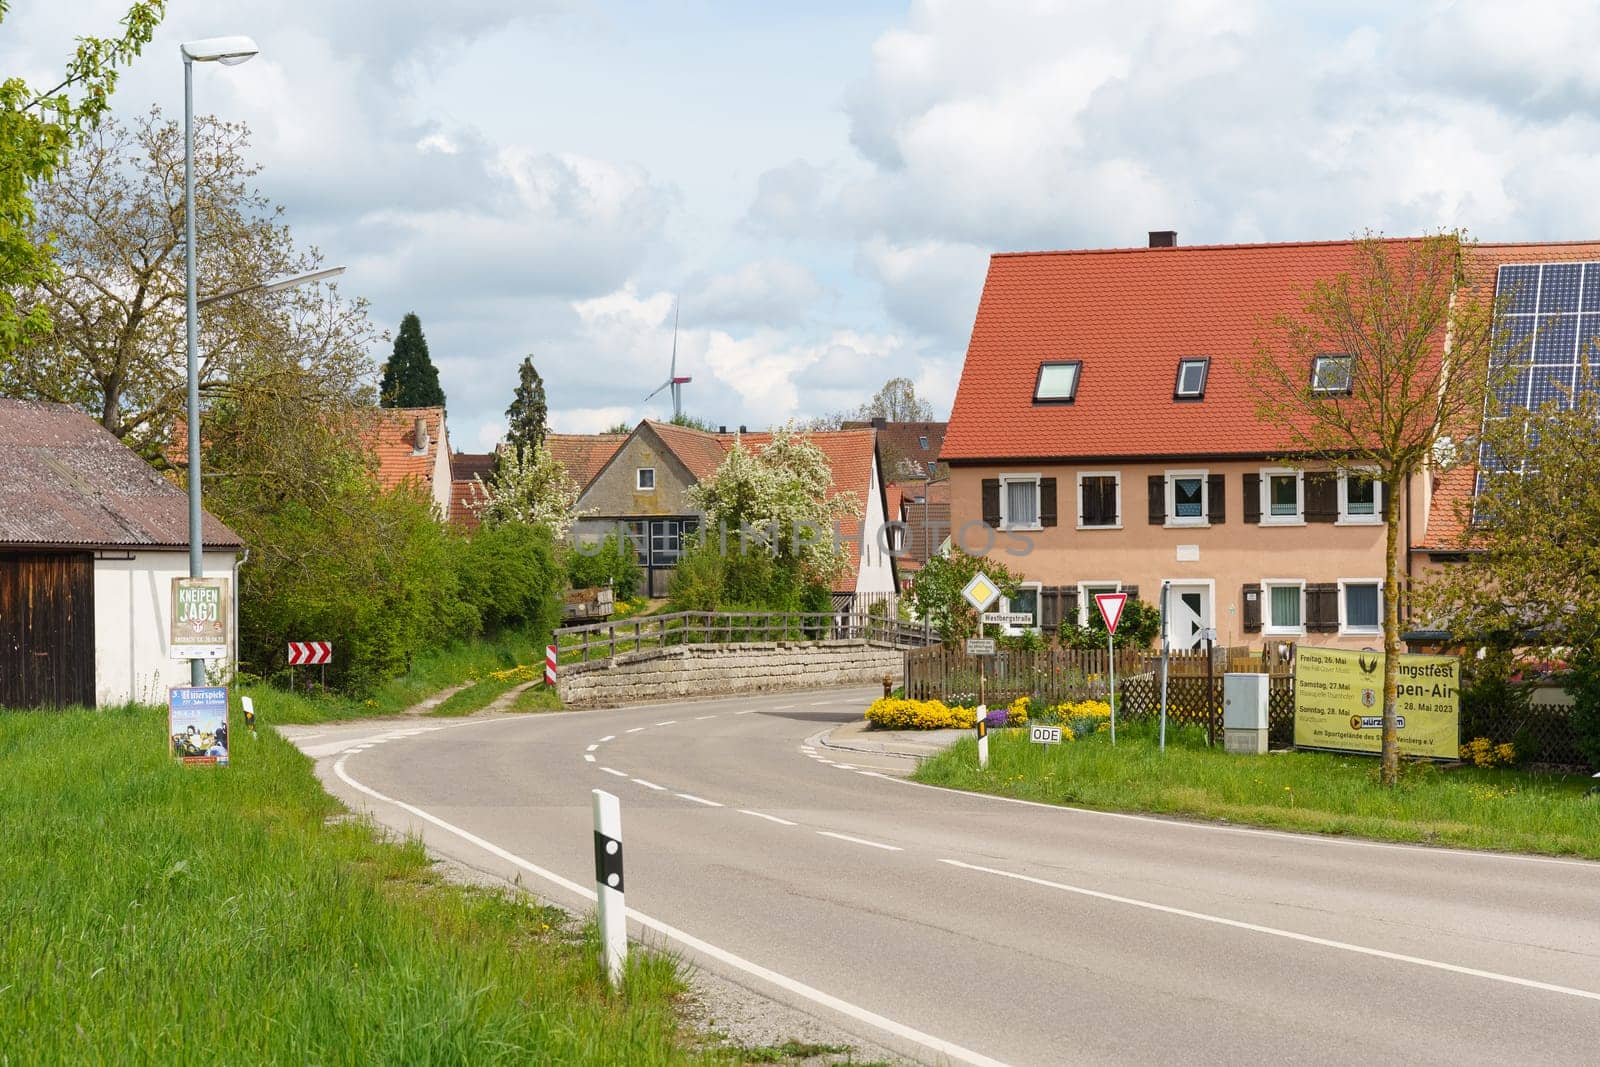 Houses along the road, cars in a German village. by Sd28DimoN_1976